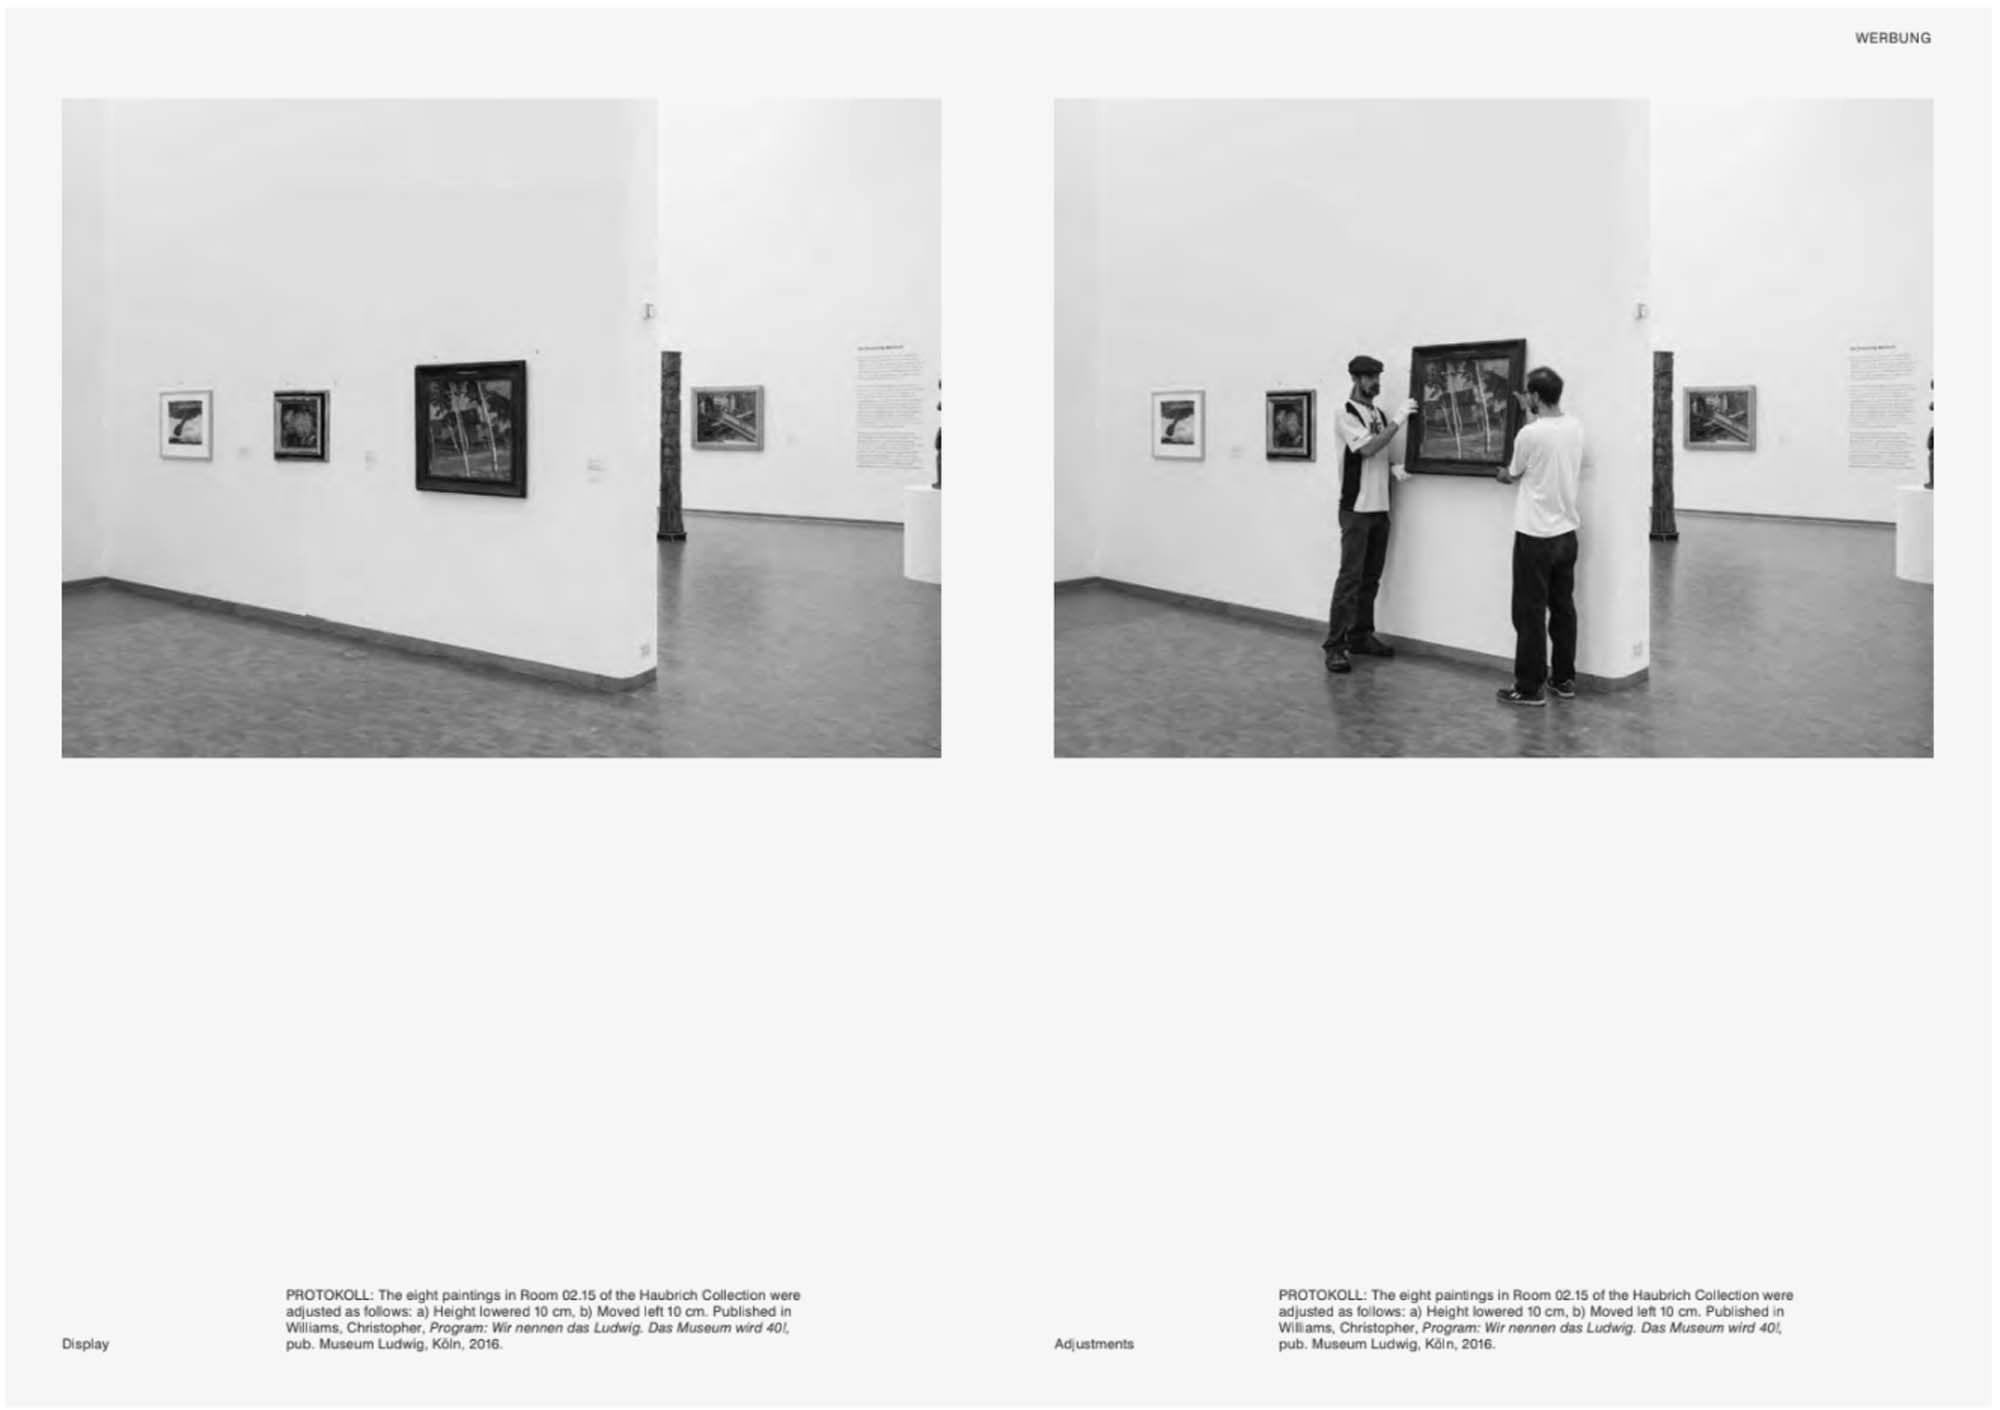 Printed matter relating to an exhibition  titled christopher williams: werbung: adapted for use / provisional prop / a 48‑hour display of quality framing materials, at haubrok foundation in 2021.